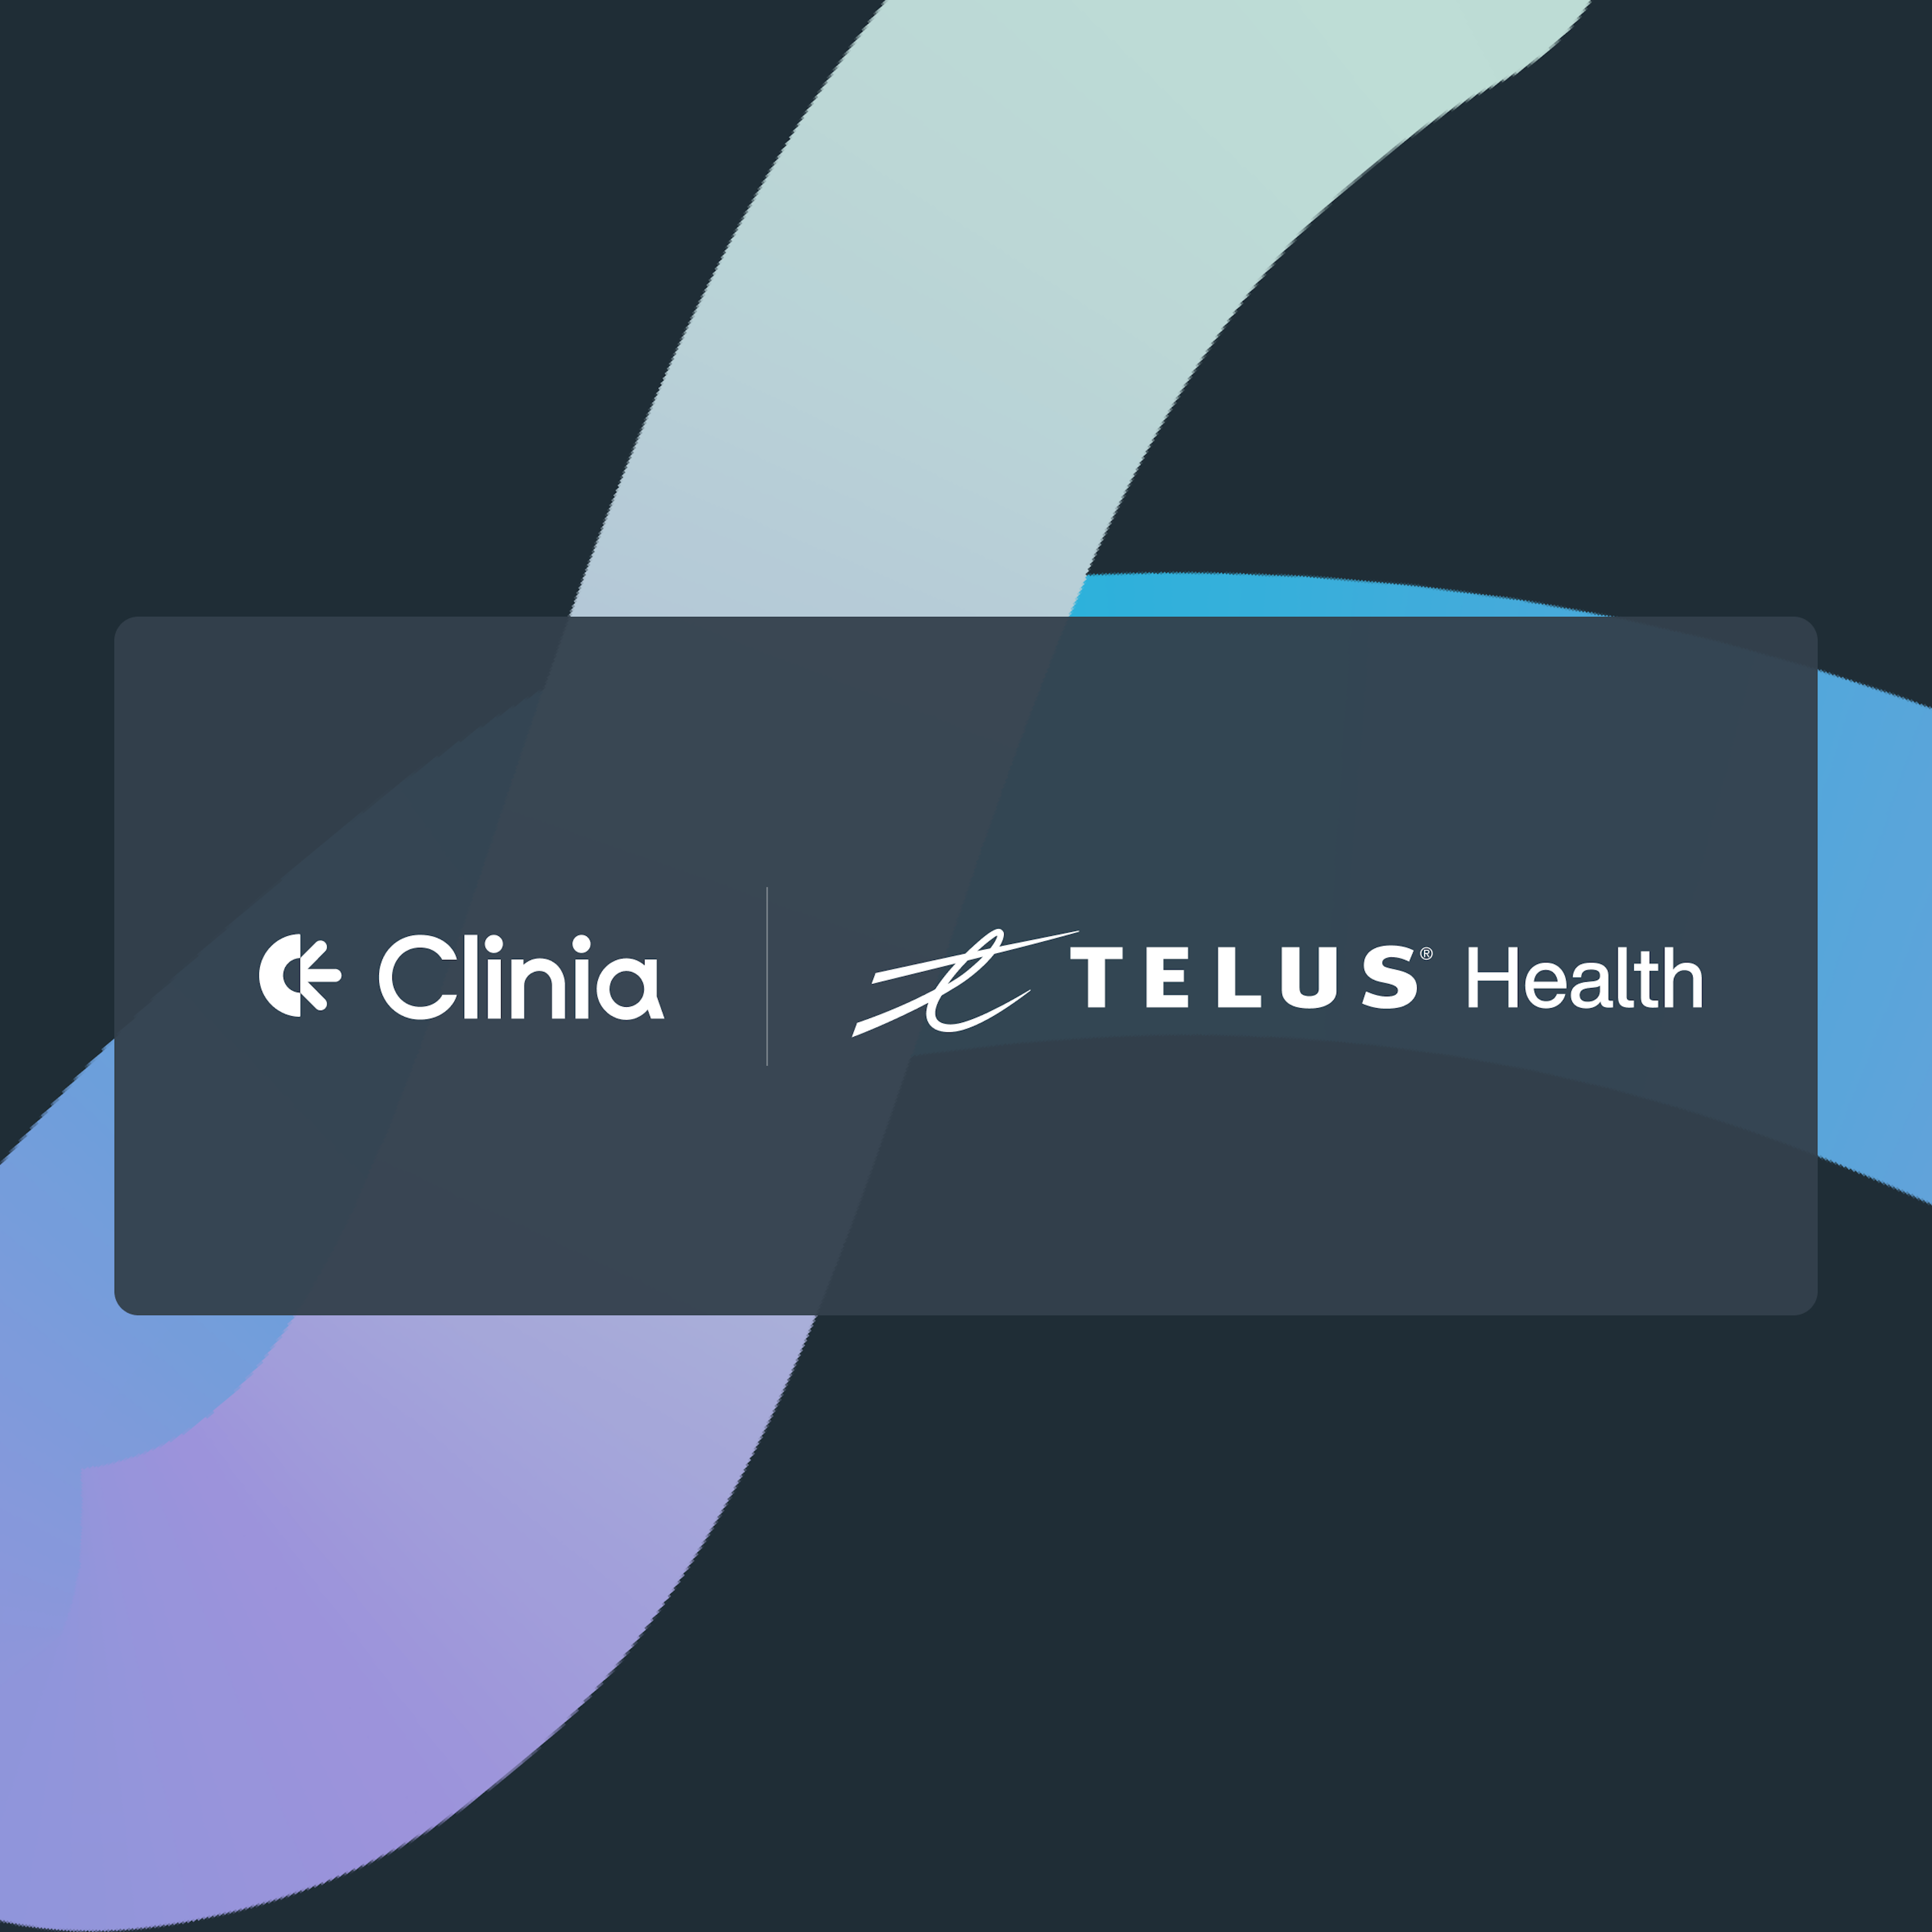 TELUS Health and Clinia join forces to transform health navigation and personalize care